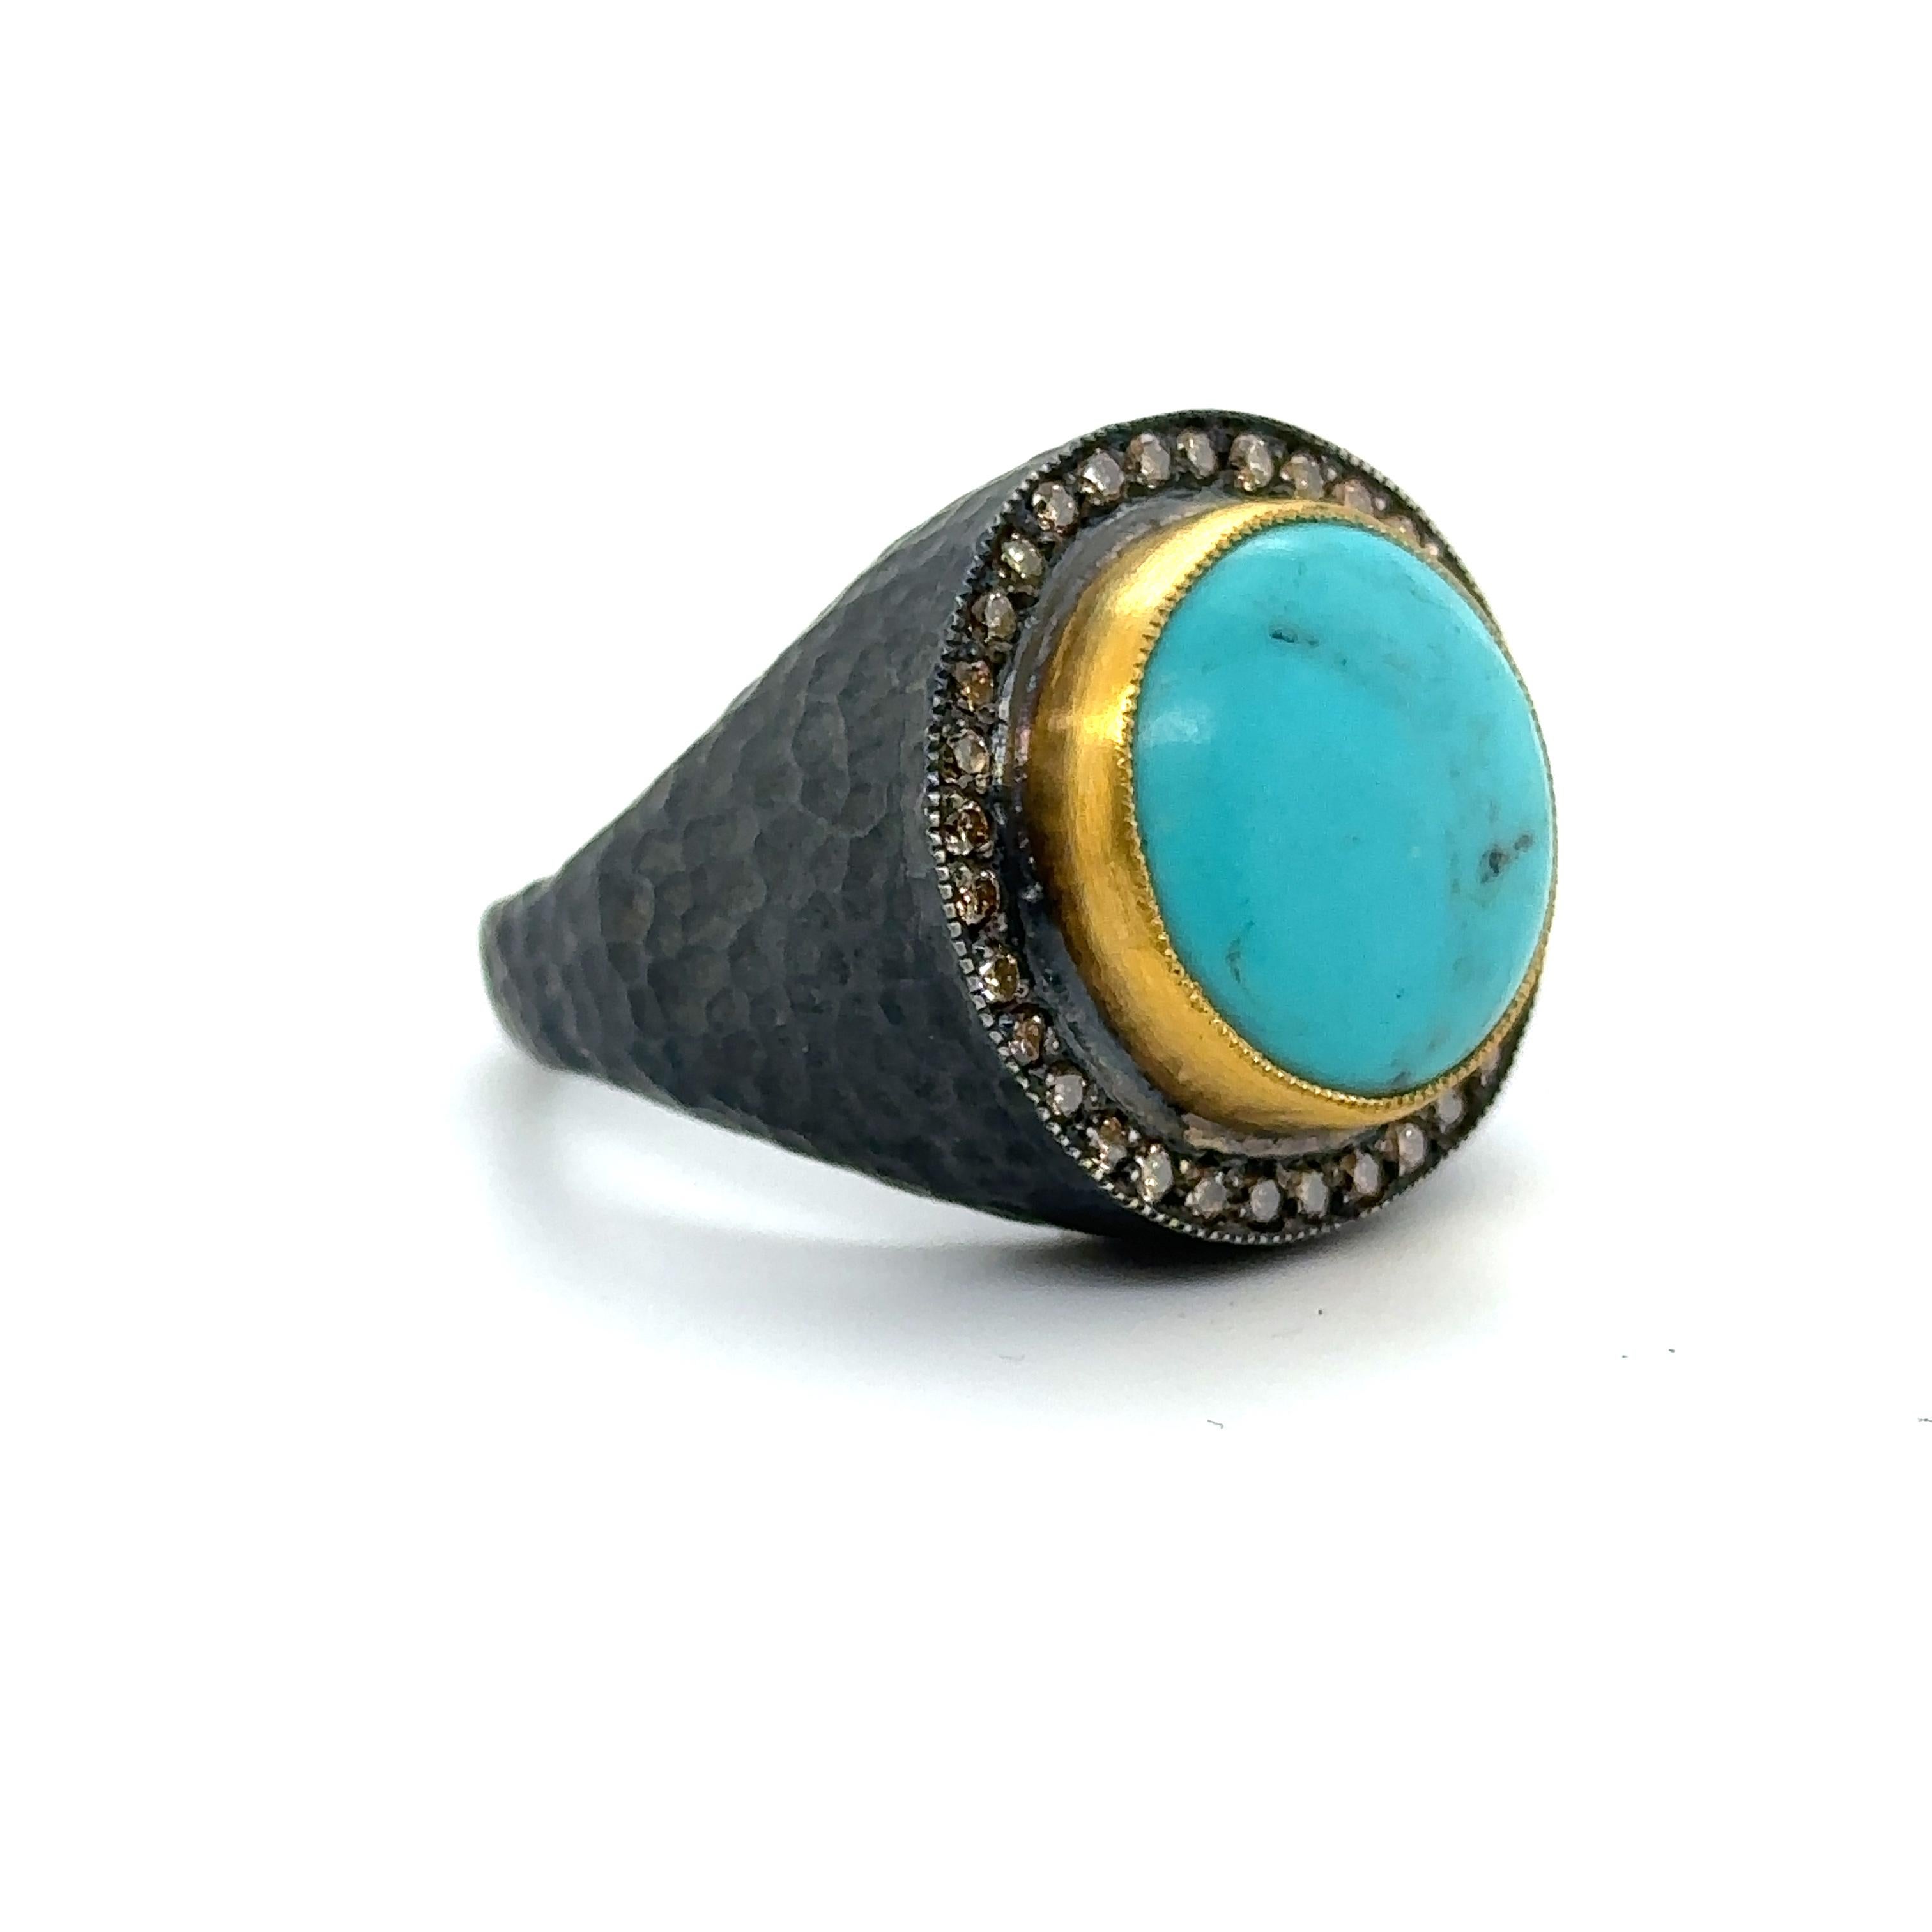 JAS-19-1968 - 24KT GOLD/SS TURQUOISE RING with CHAMPAGNE DIAMONDS In New Condition For Sale In New York, NY